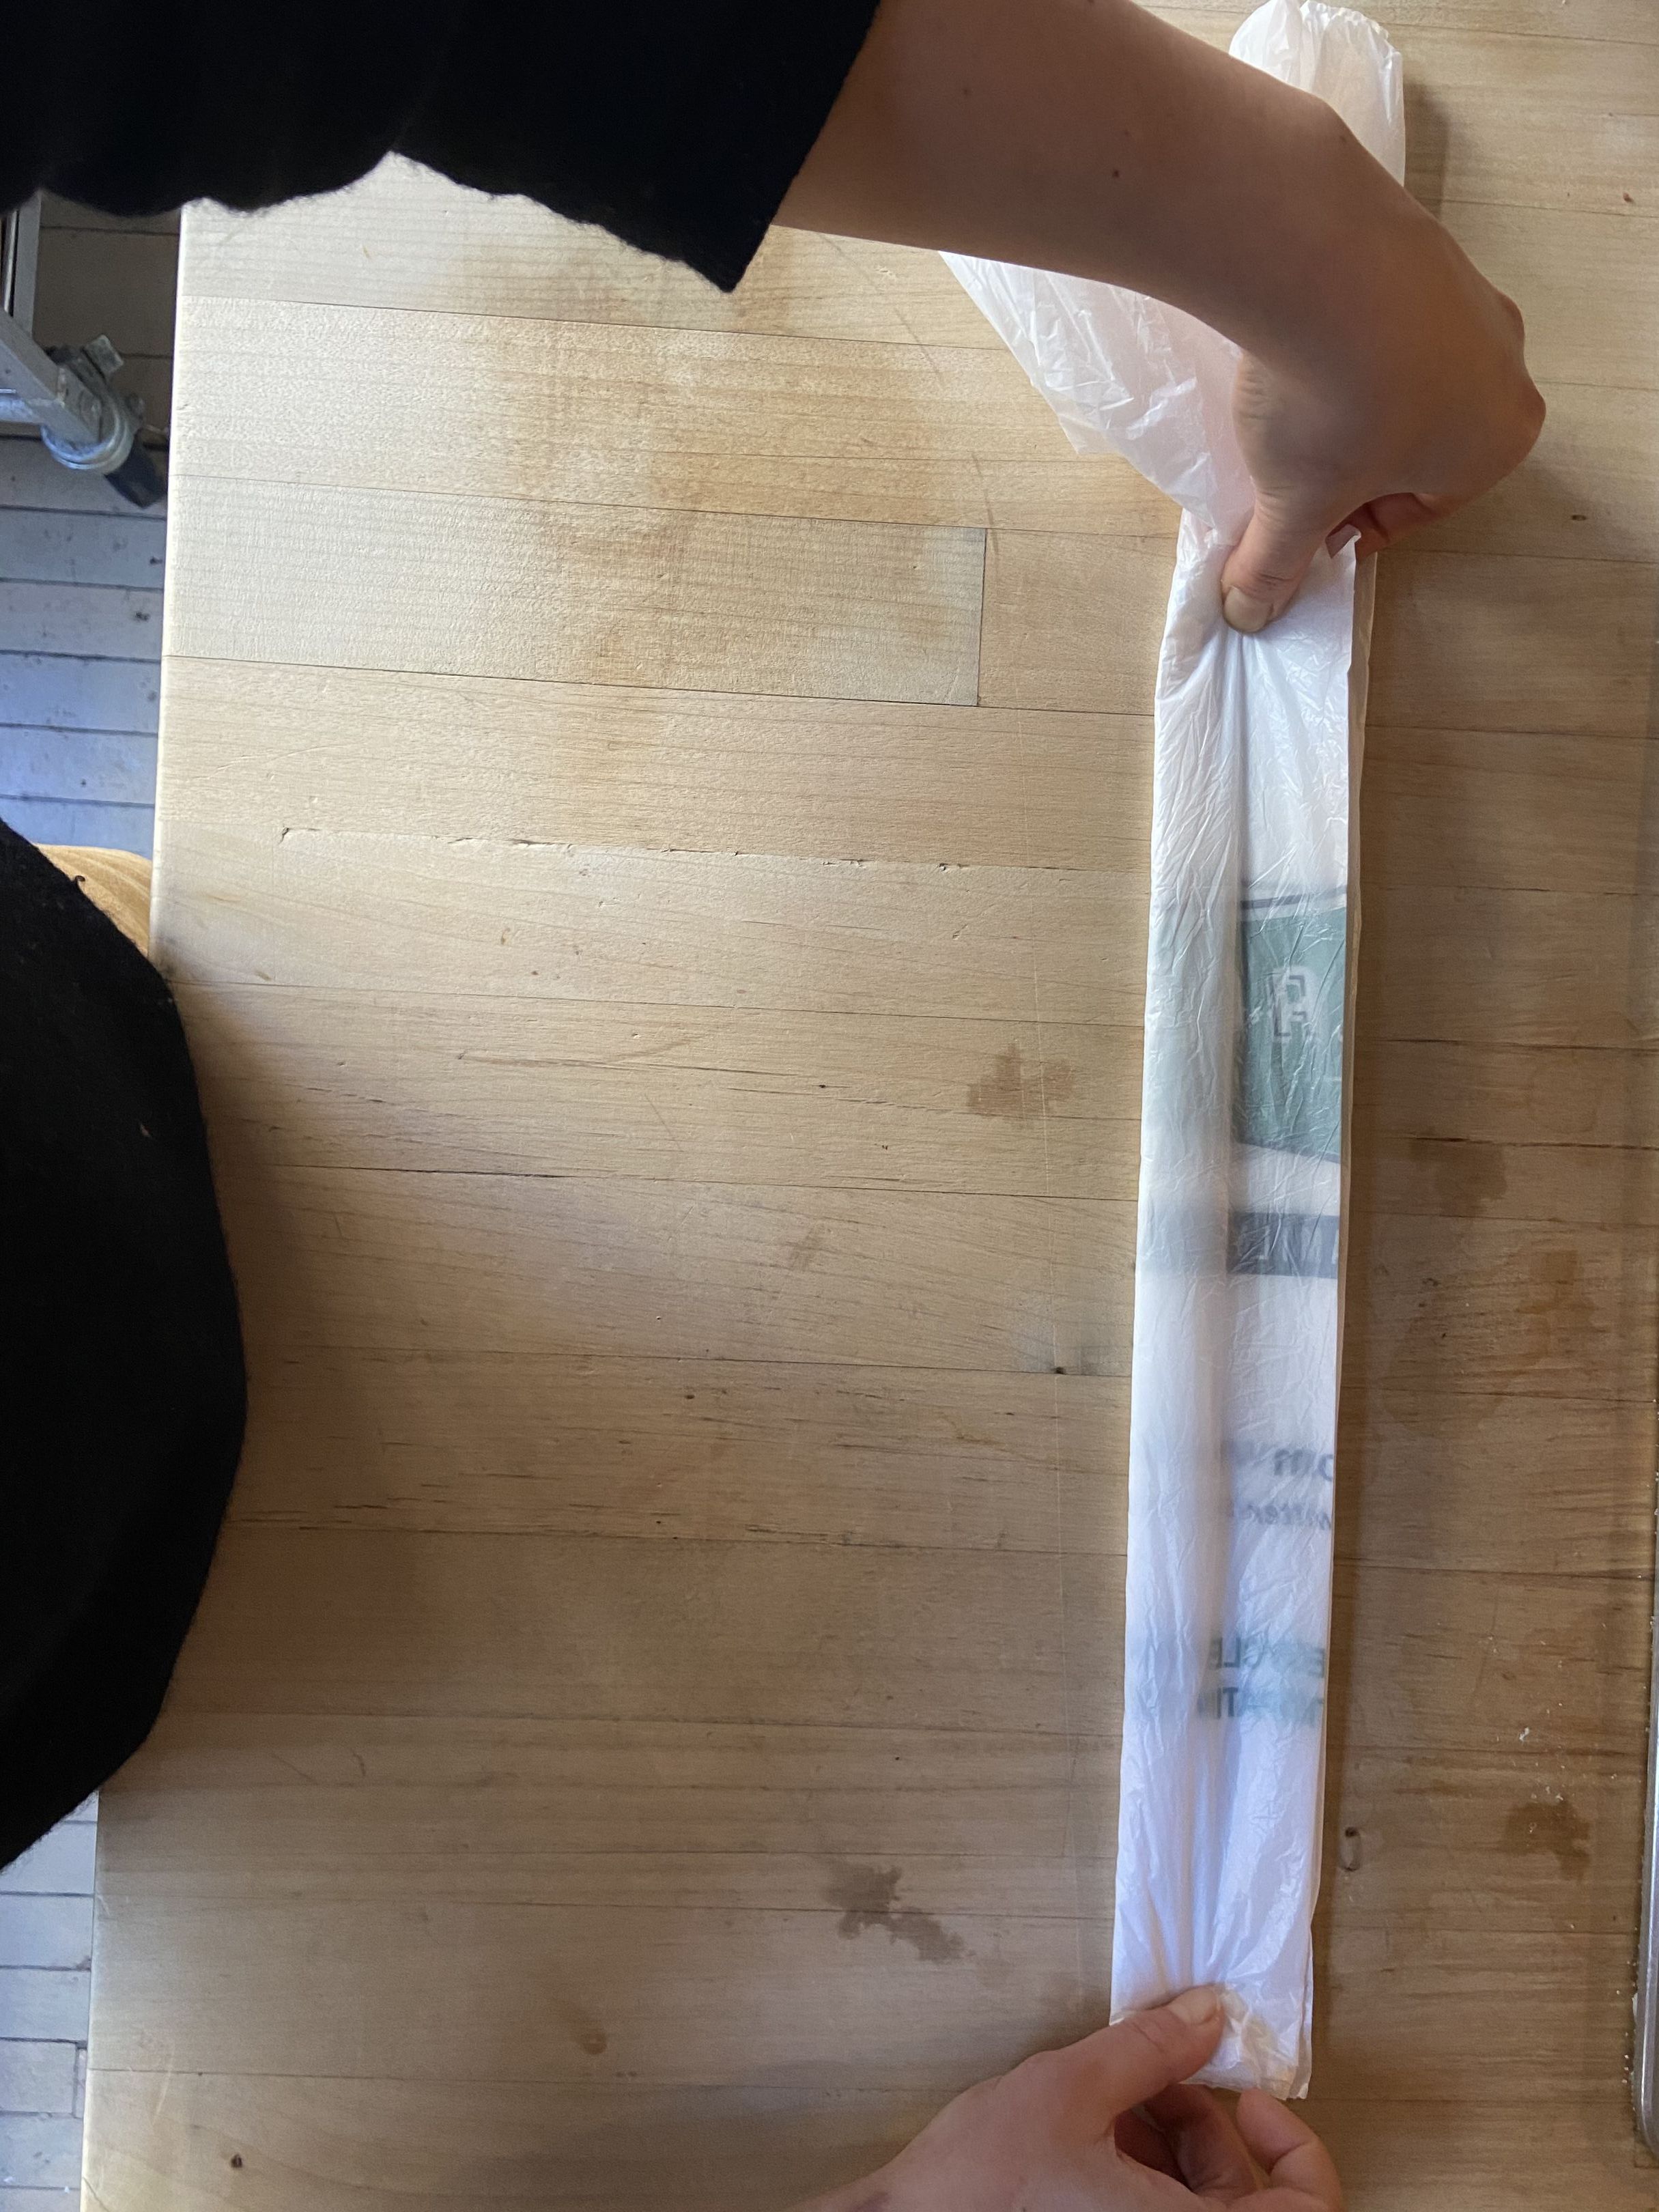 A Neat Folding Trick for Storing Plastic Grocery Bags—So You Can Actually Reuse Them